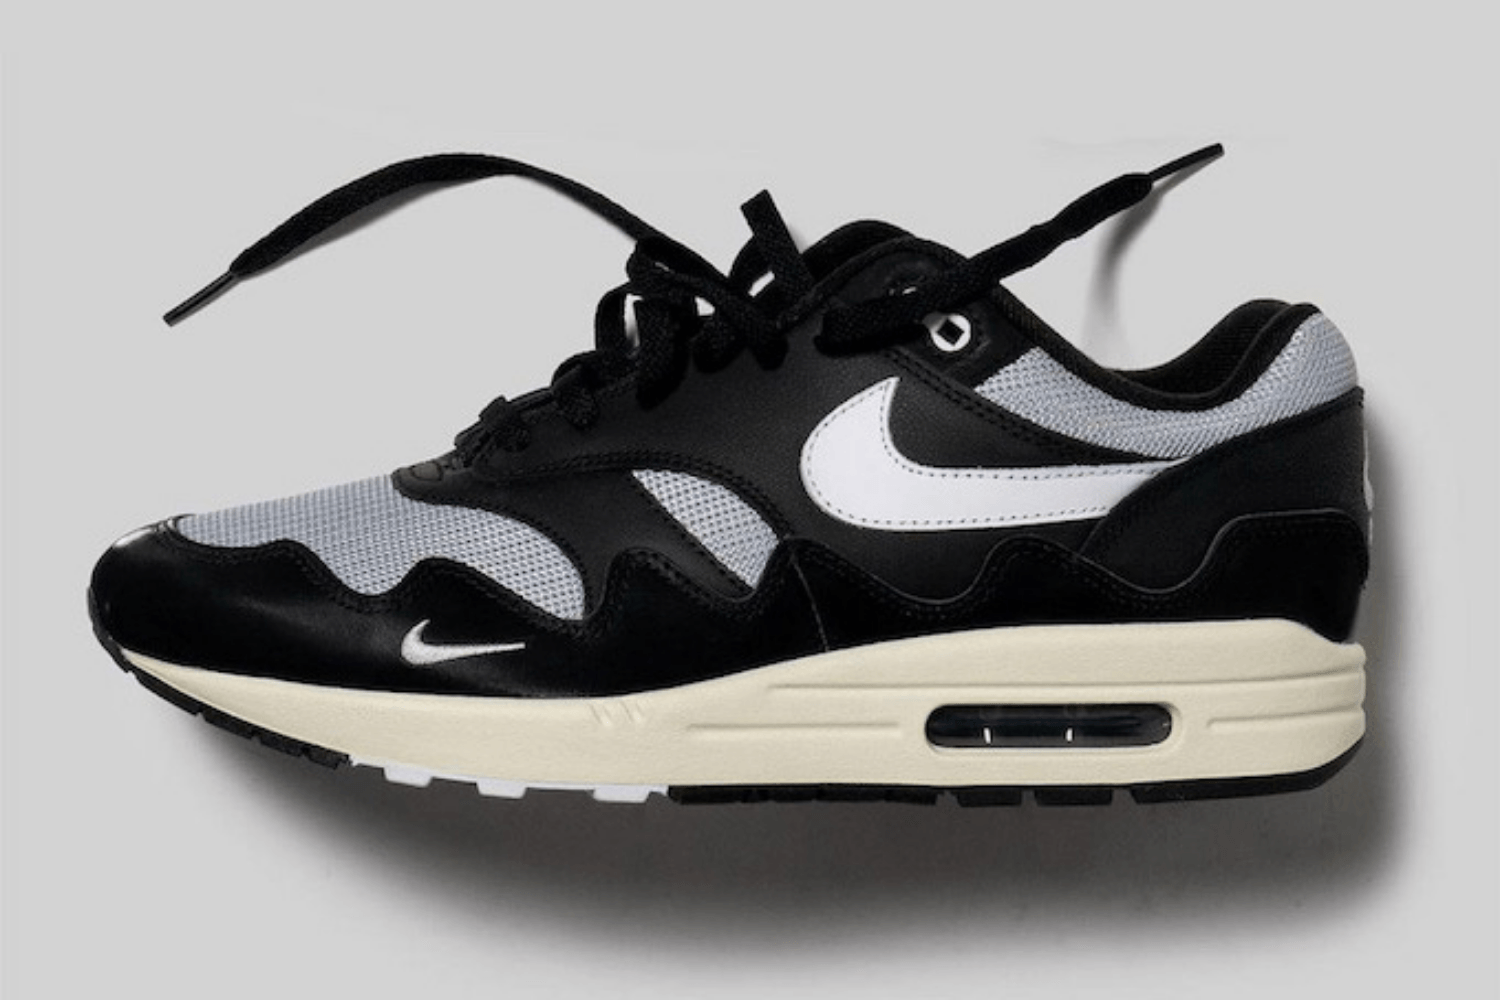 First images of Patta x Nike Air Max 1 The Wave 'Black'